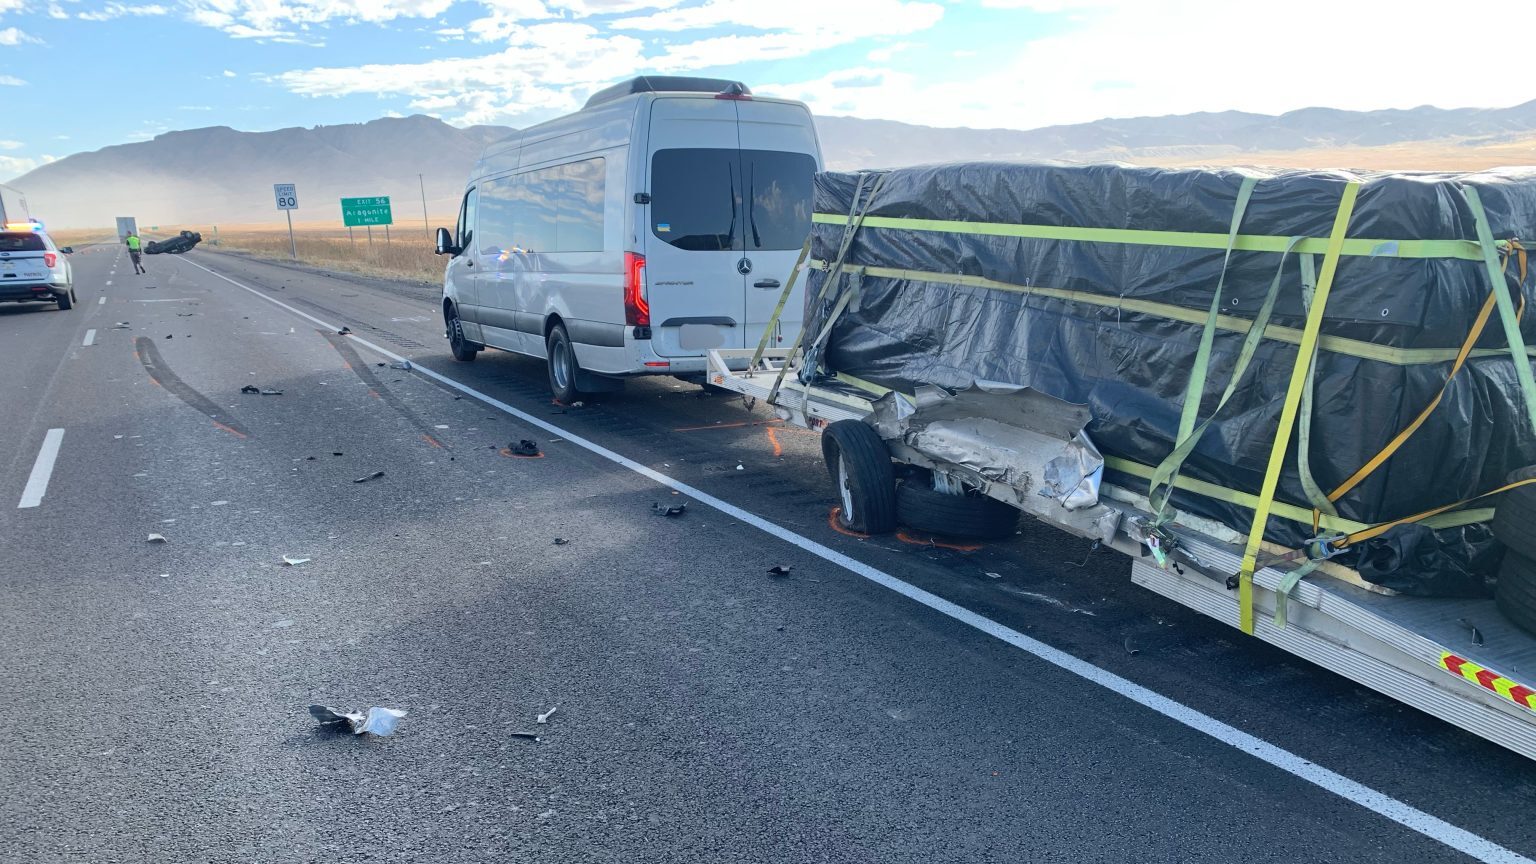 The trailer that was struck by a car that then killed the driver of the van in collision on I-80.